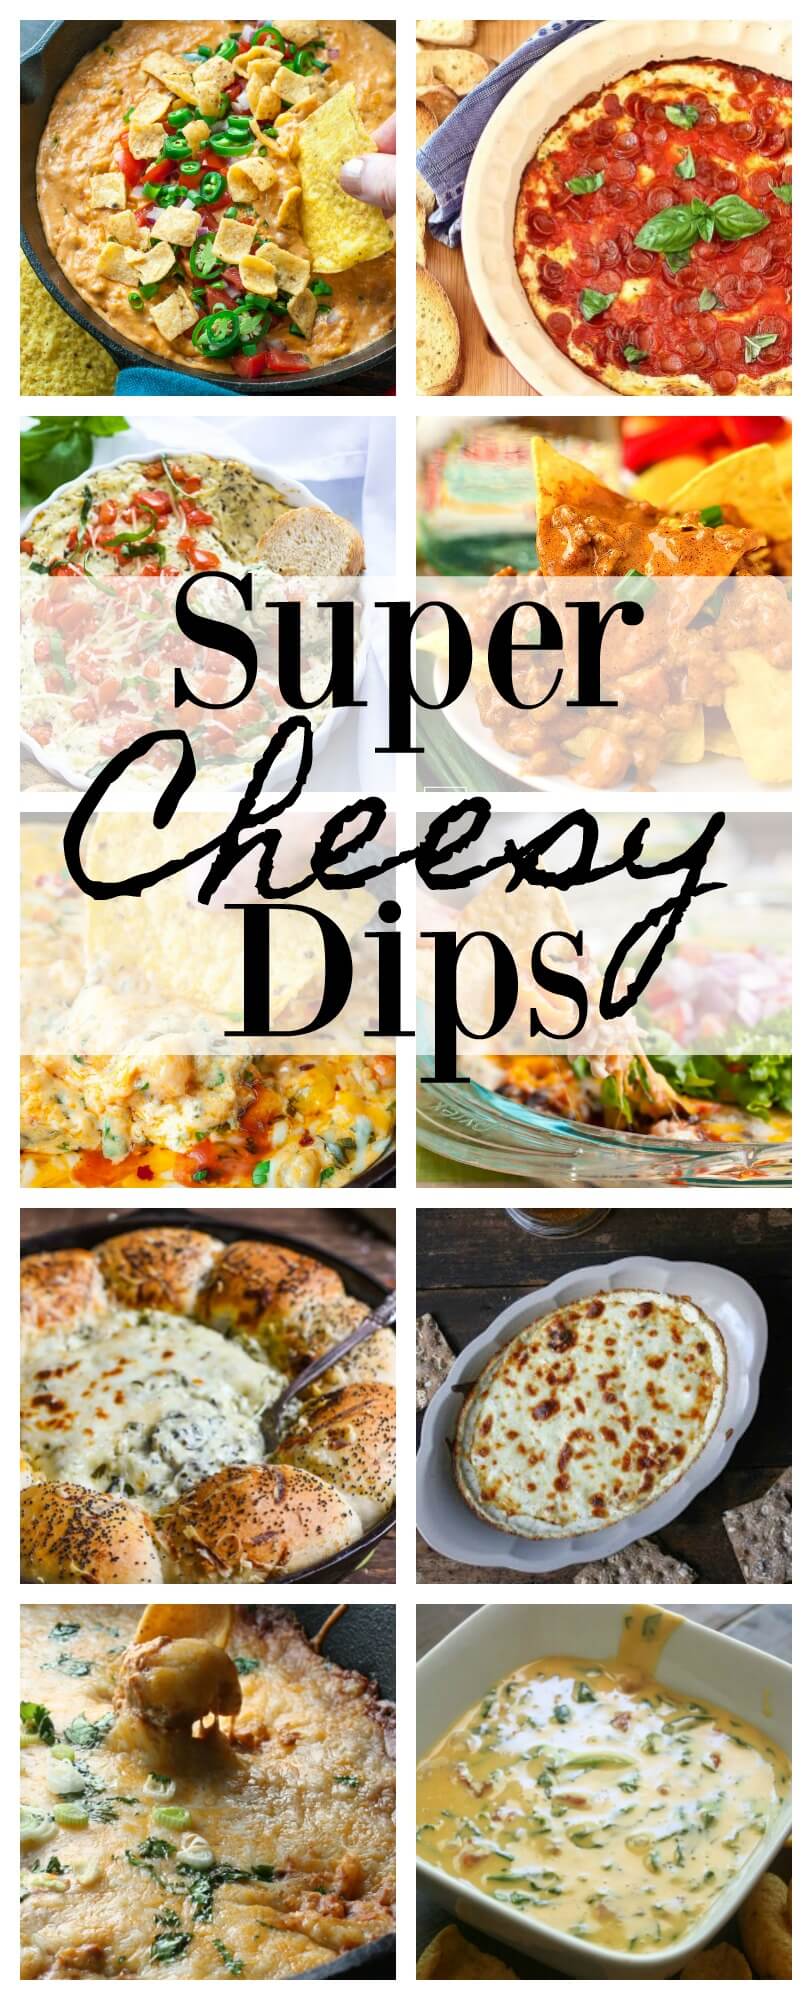 This collection of Super Cheesy Dips is your go-to when it comes to parties, tailgating, or just to self indulge on cheese, glorious melted bubbly cheese! 